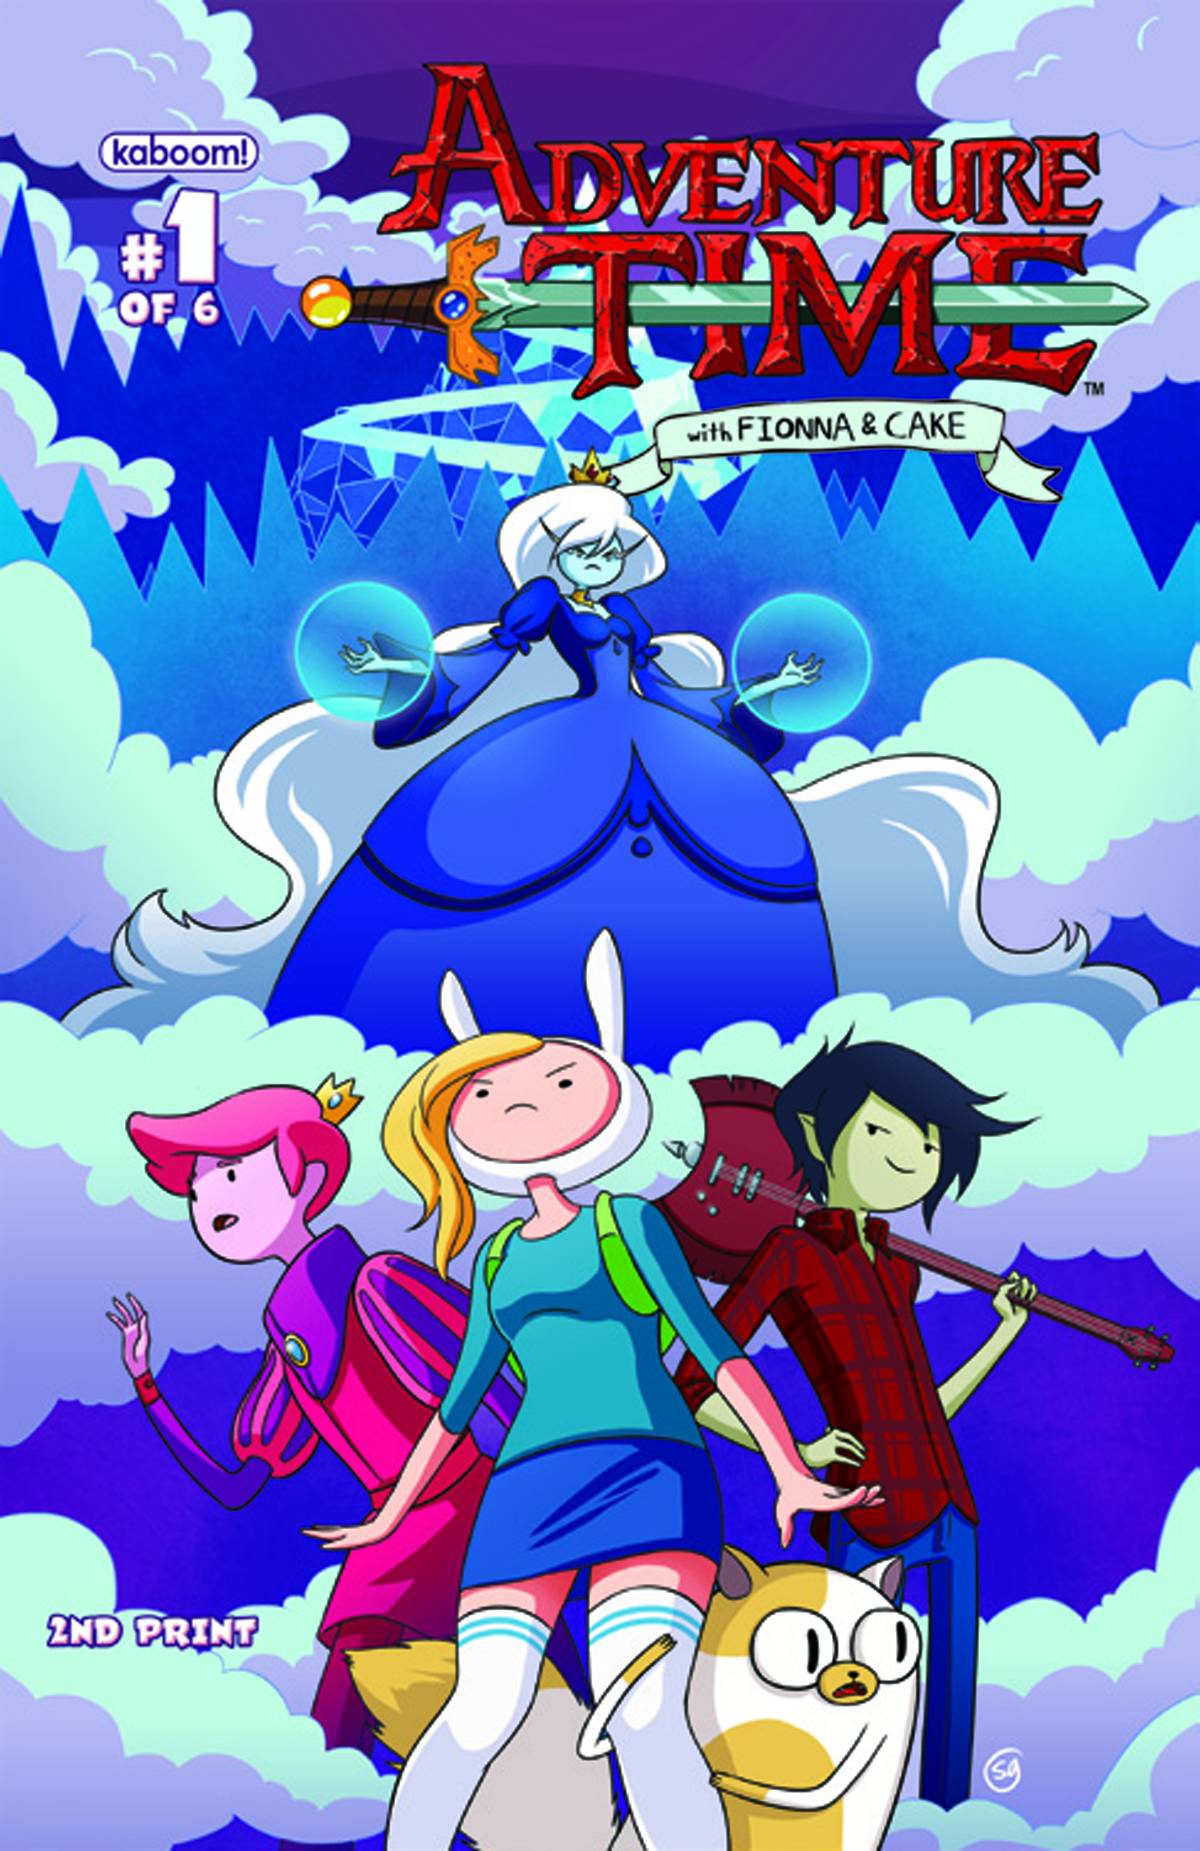 Adventure Time Fionna & Cake #1 2nd Printing